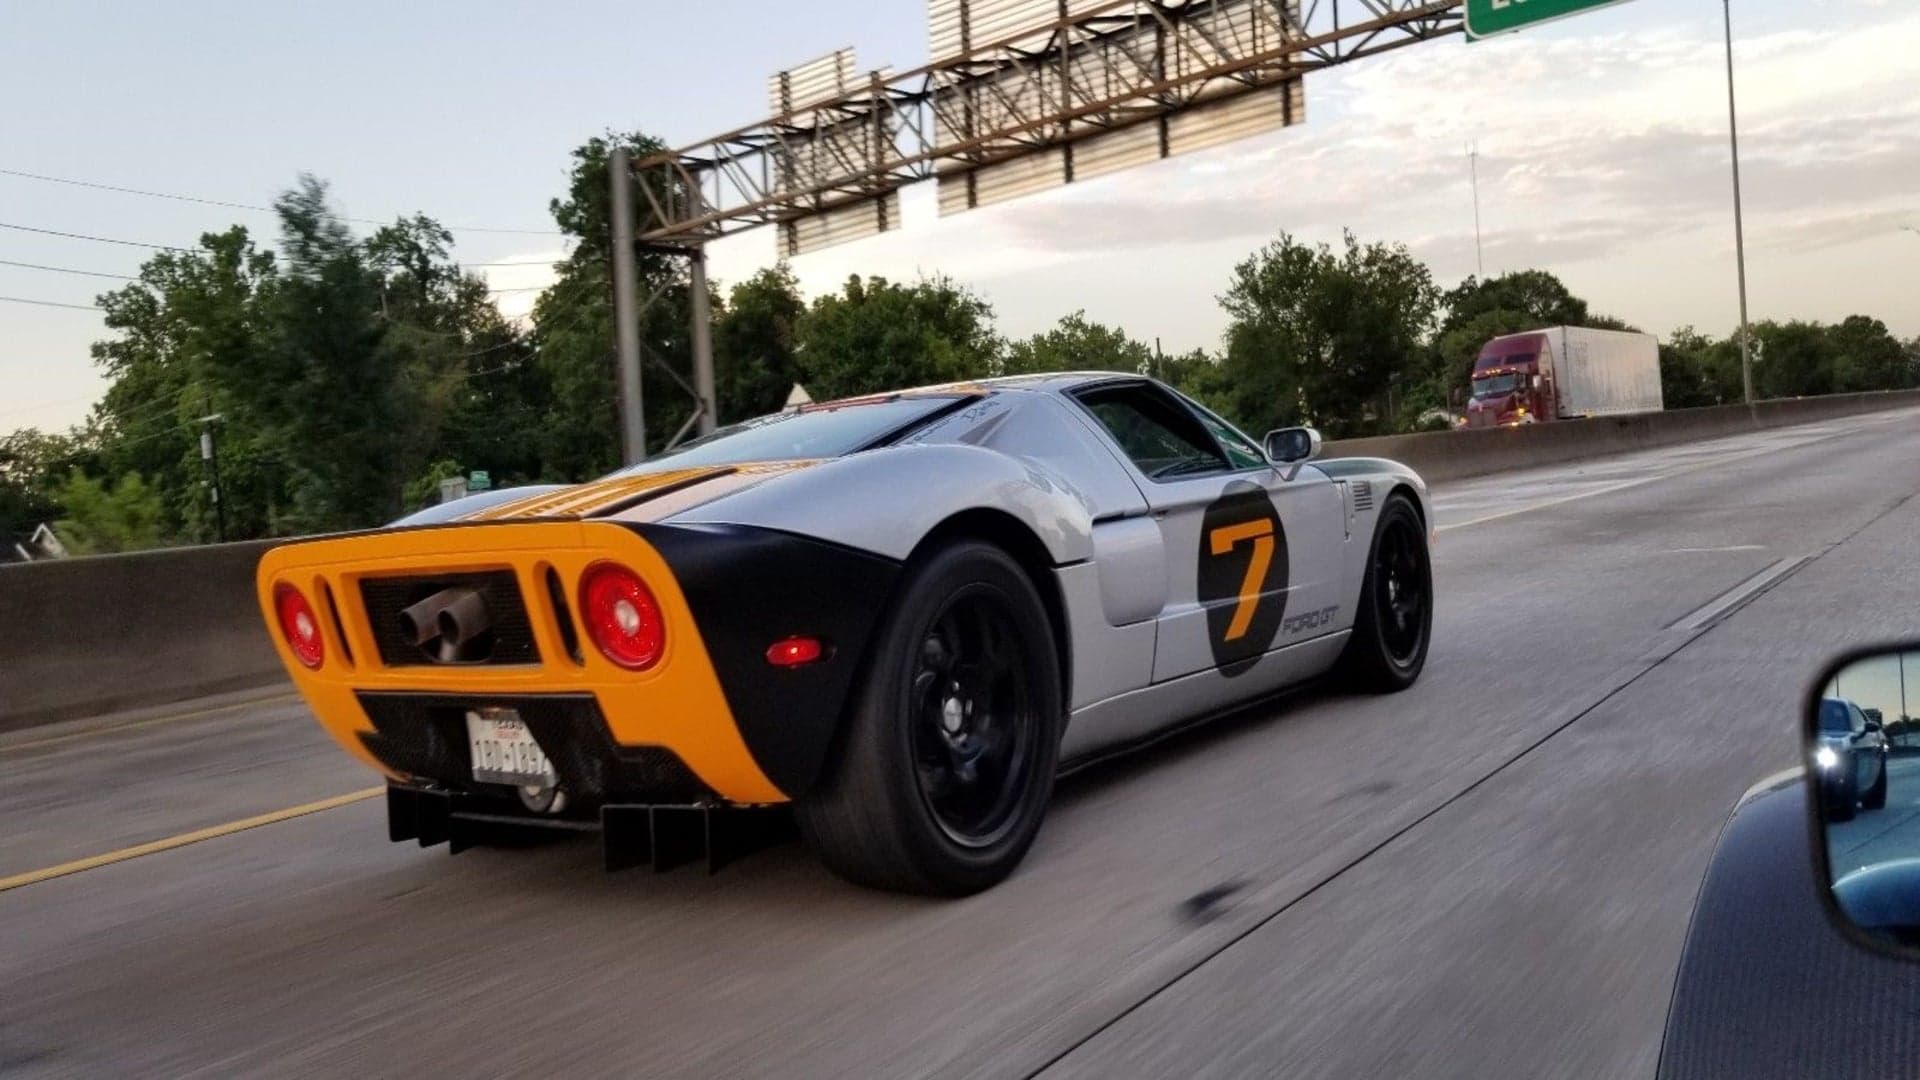 Ford GT Designer Camilo Pardo’s One-of-One Solar 7 Ford GT Is for Sale